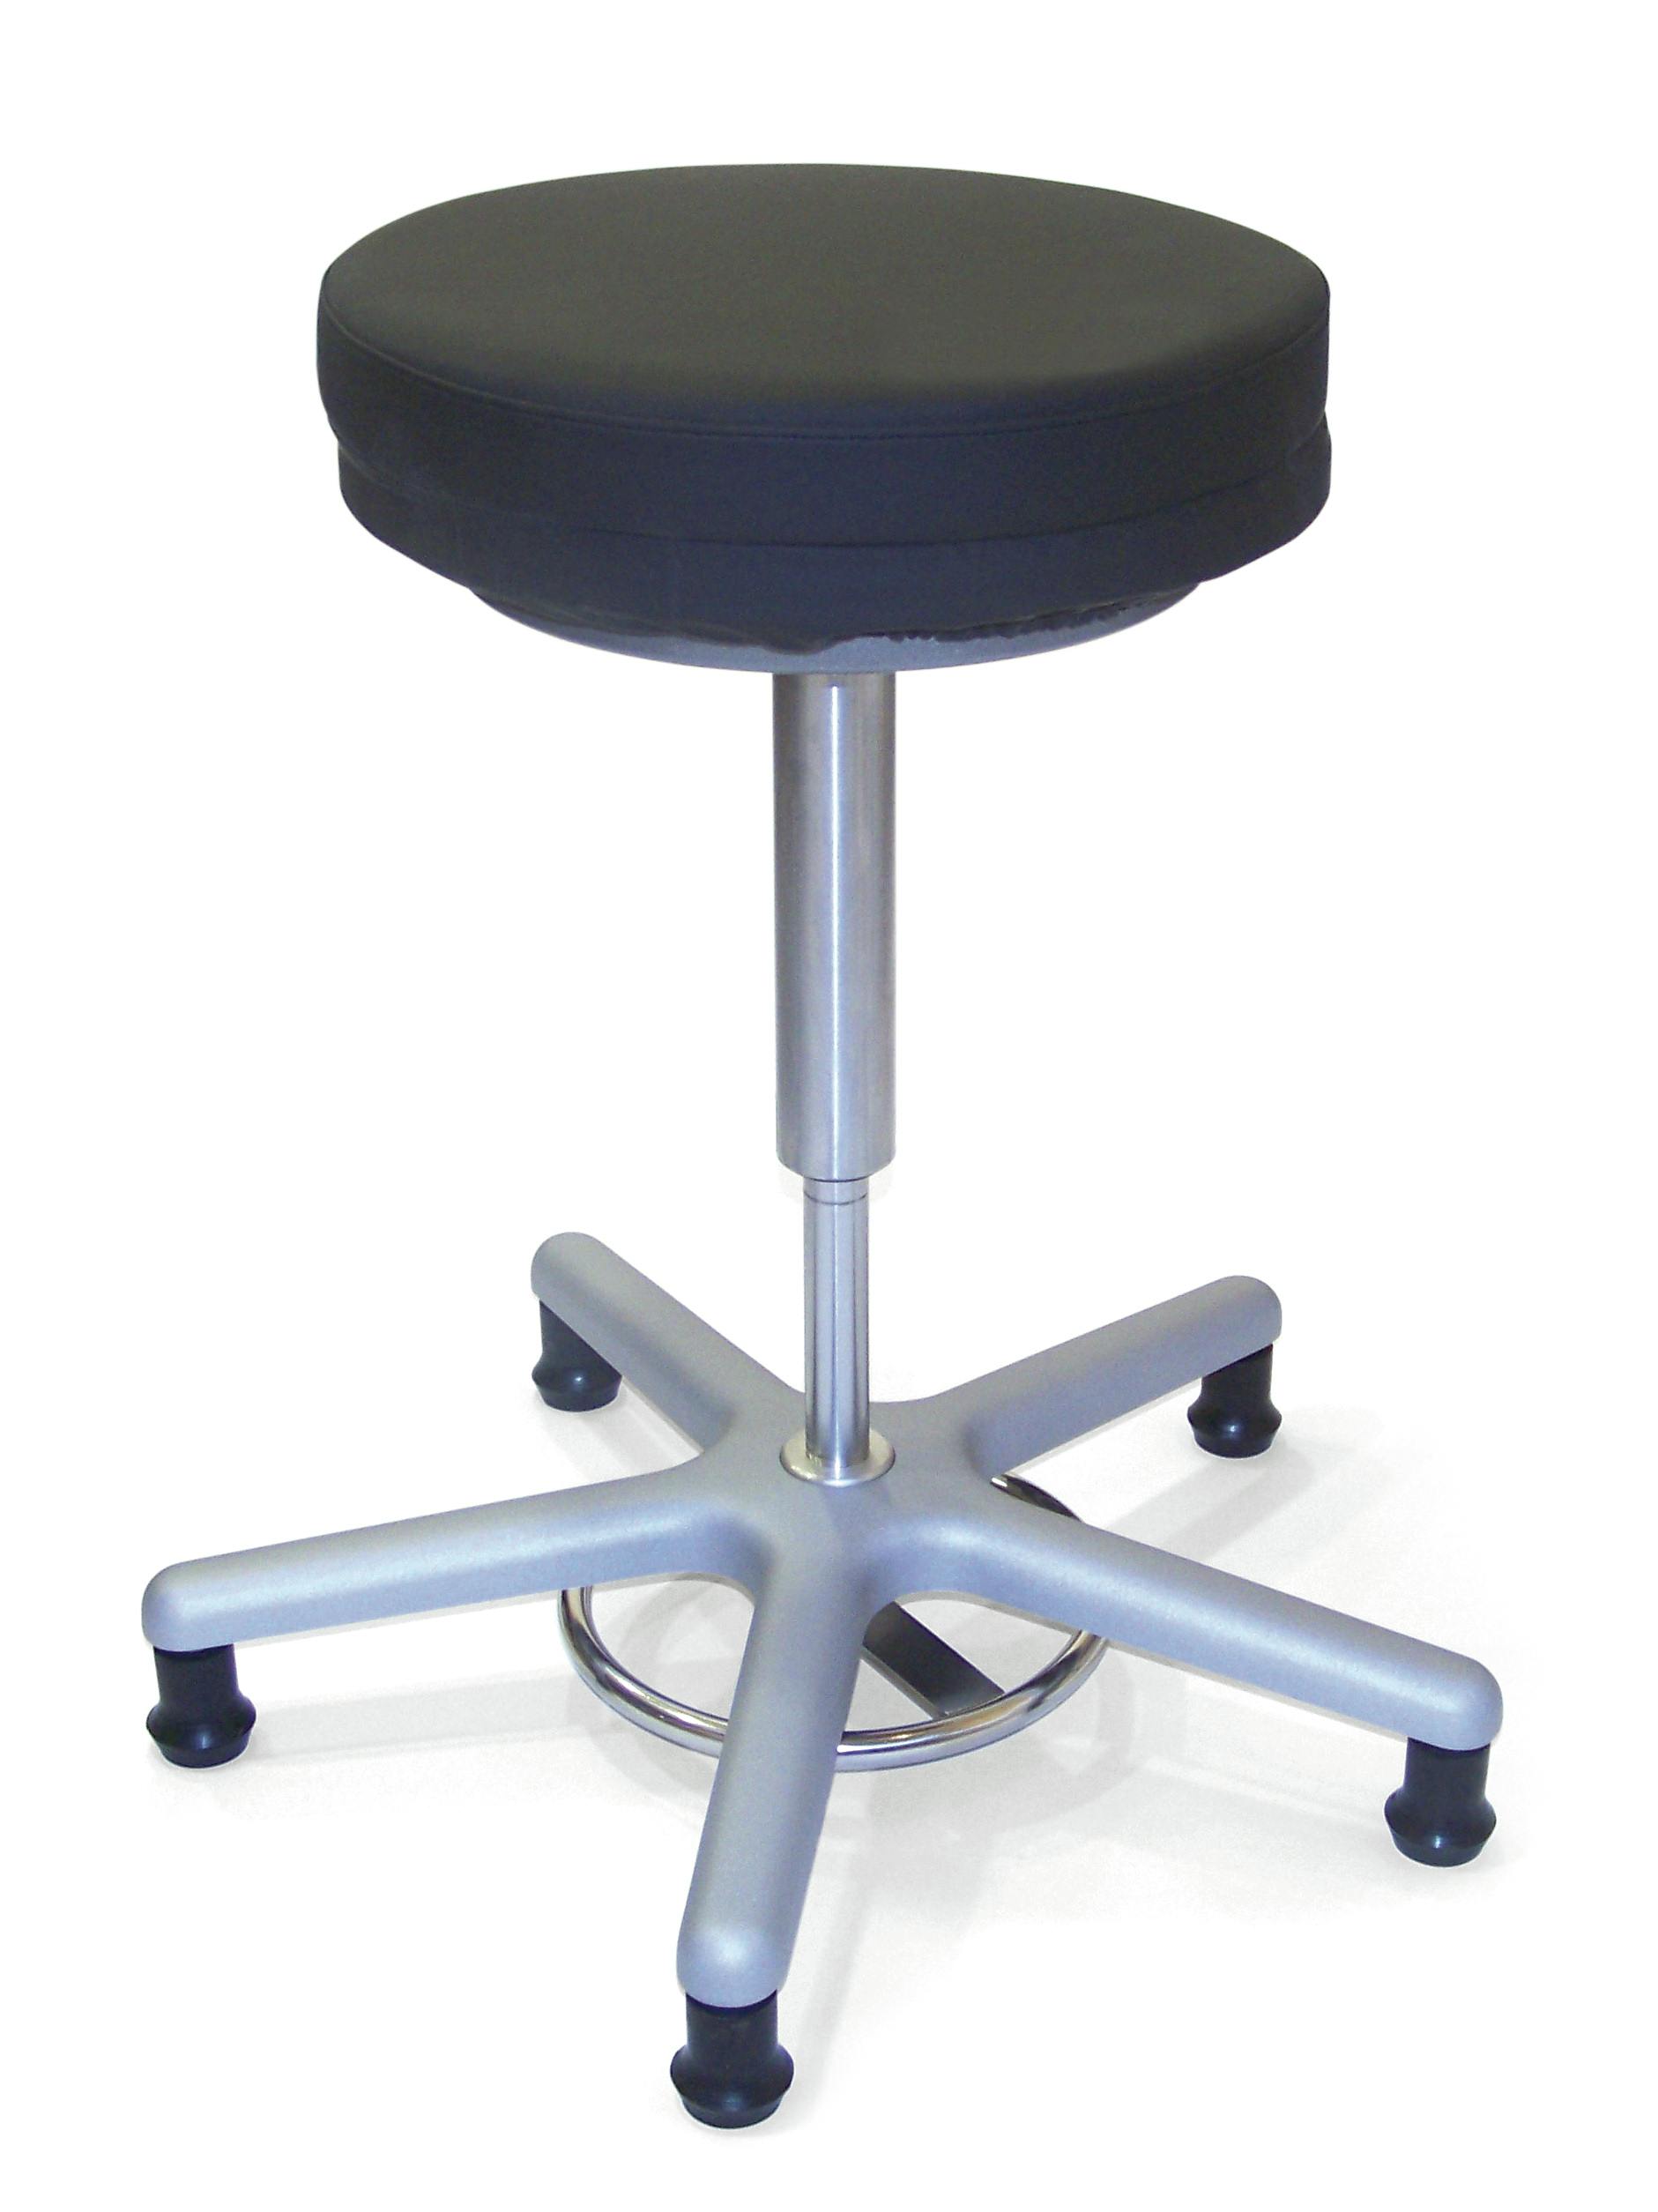 Surgeon's Stool - with Stump Feet - includes Seat Cushion - SWL 150kg